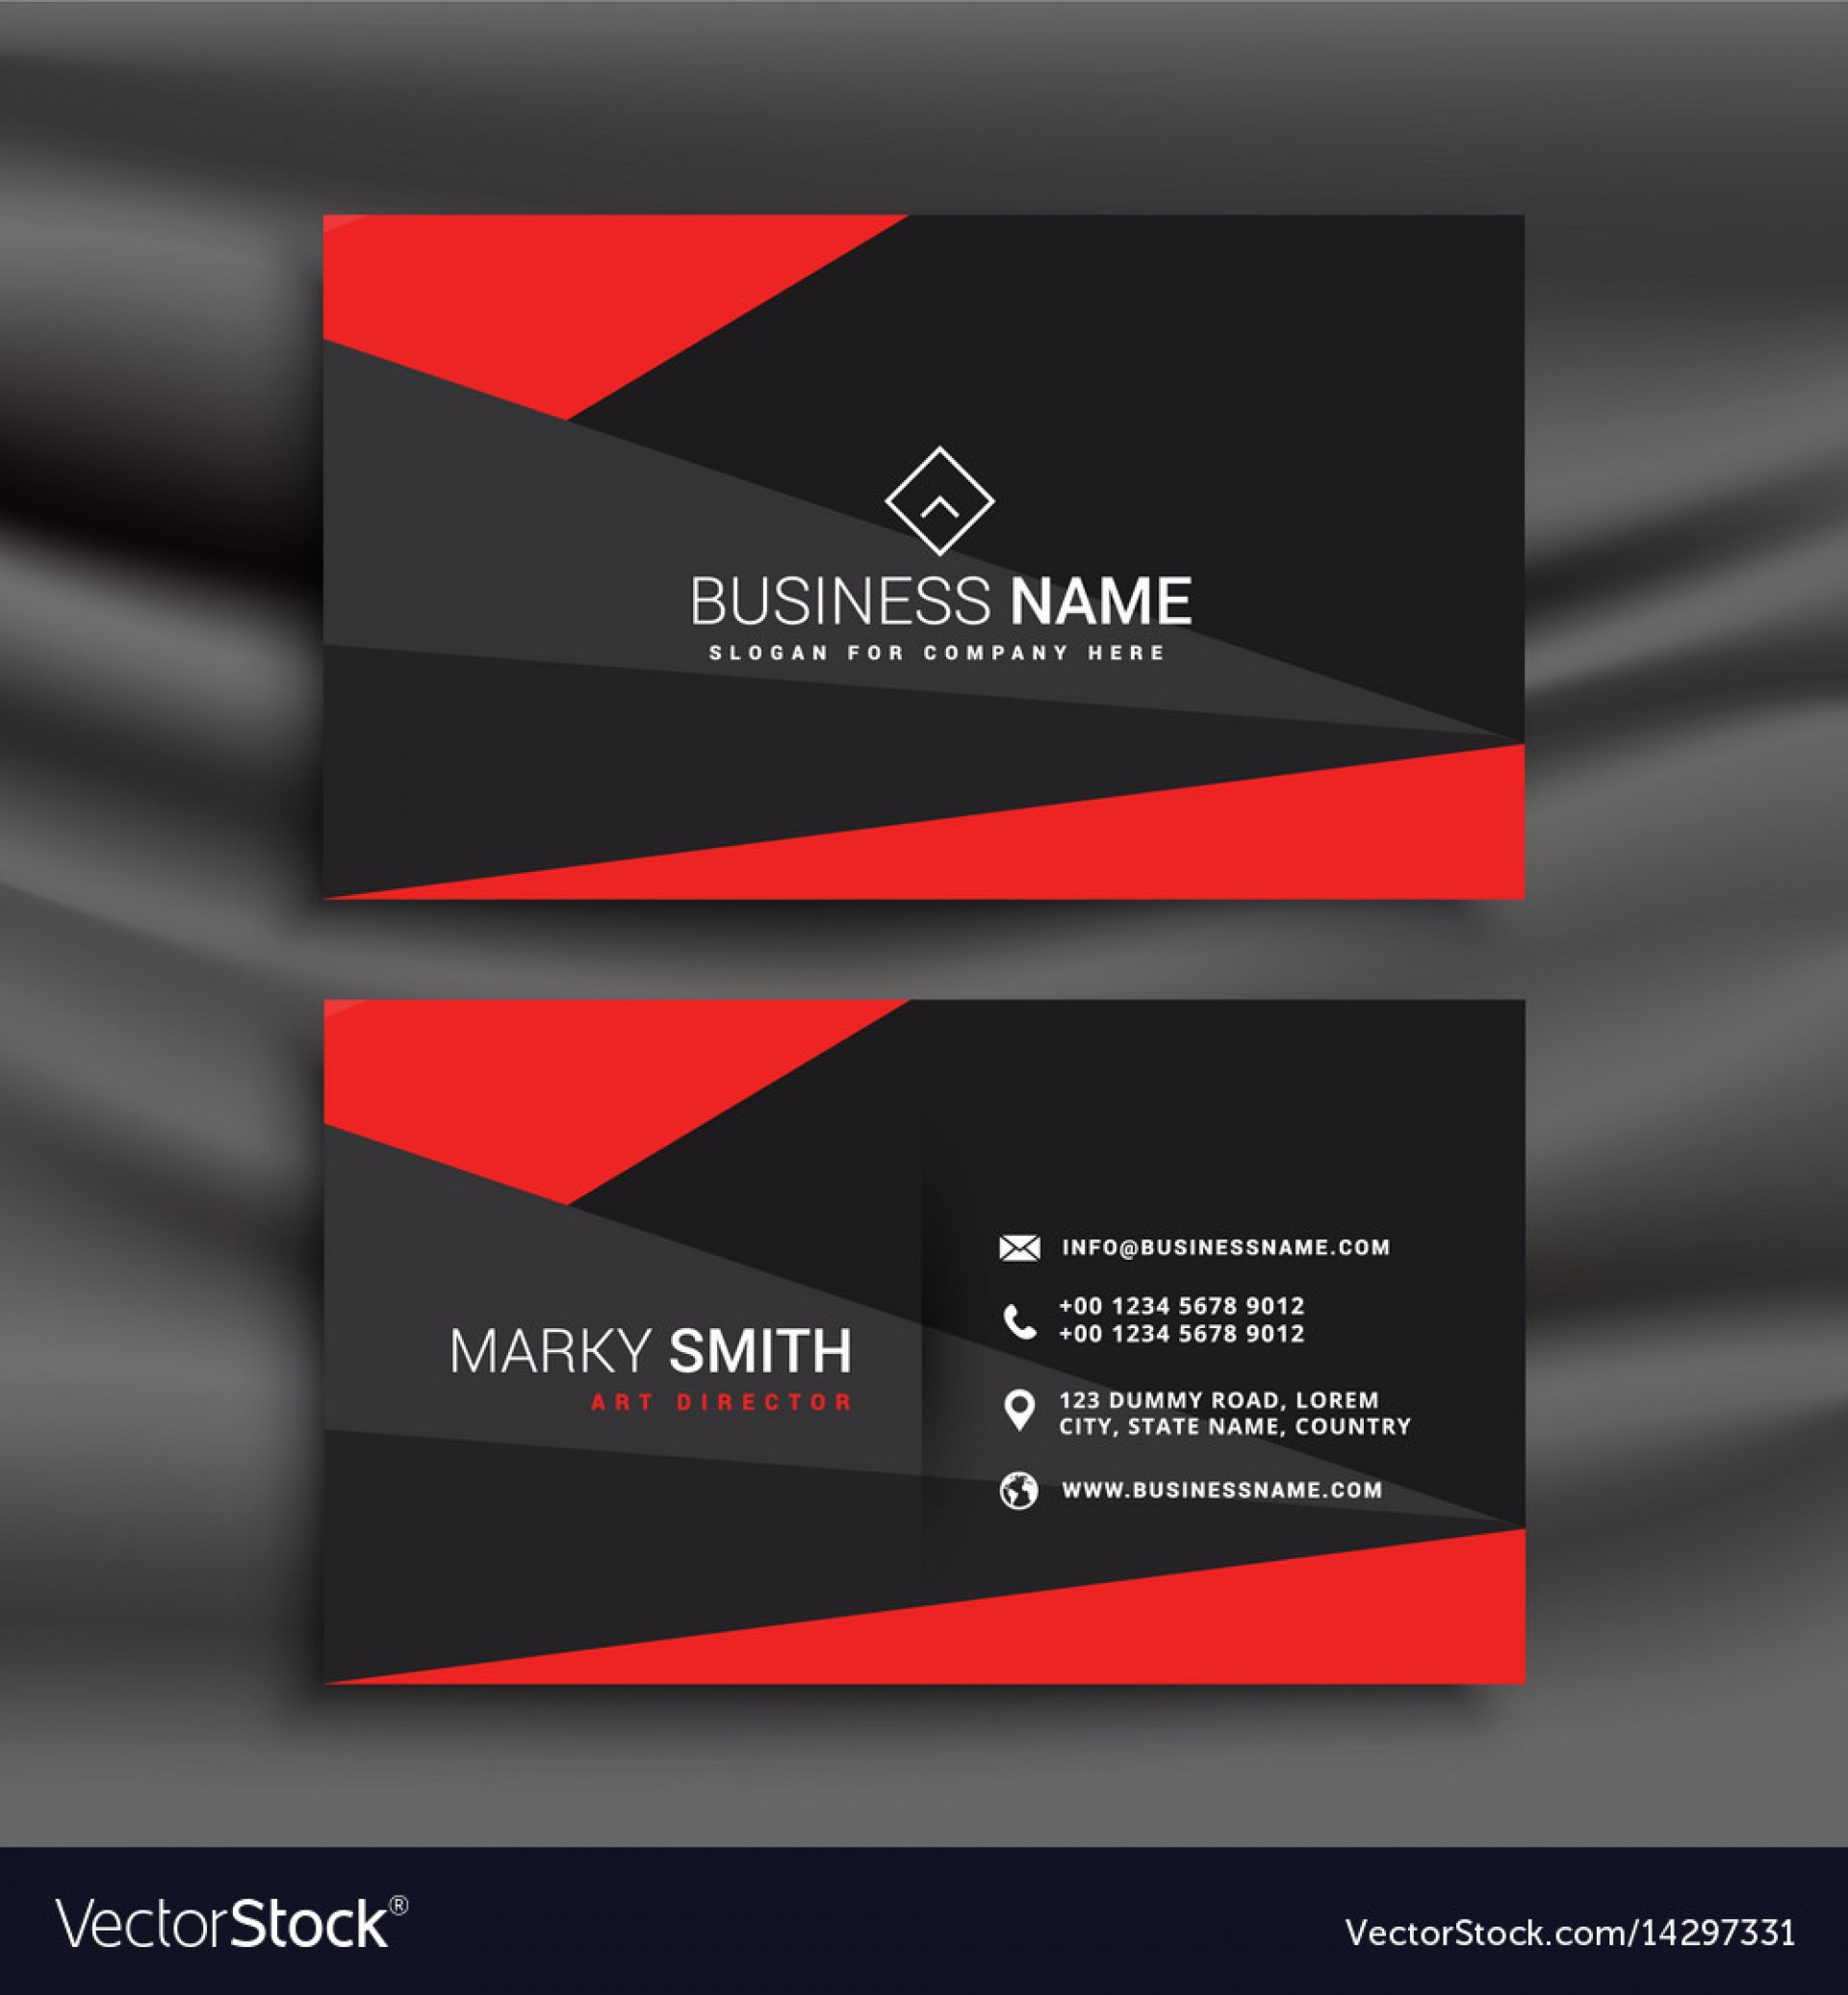 Beautiful Band Business Card Templates Free Of Avery Com Templates 8371 Business Cards